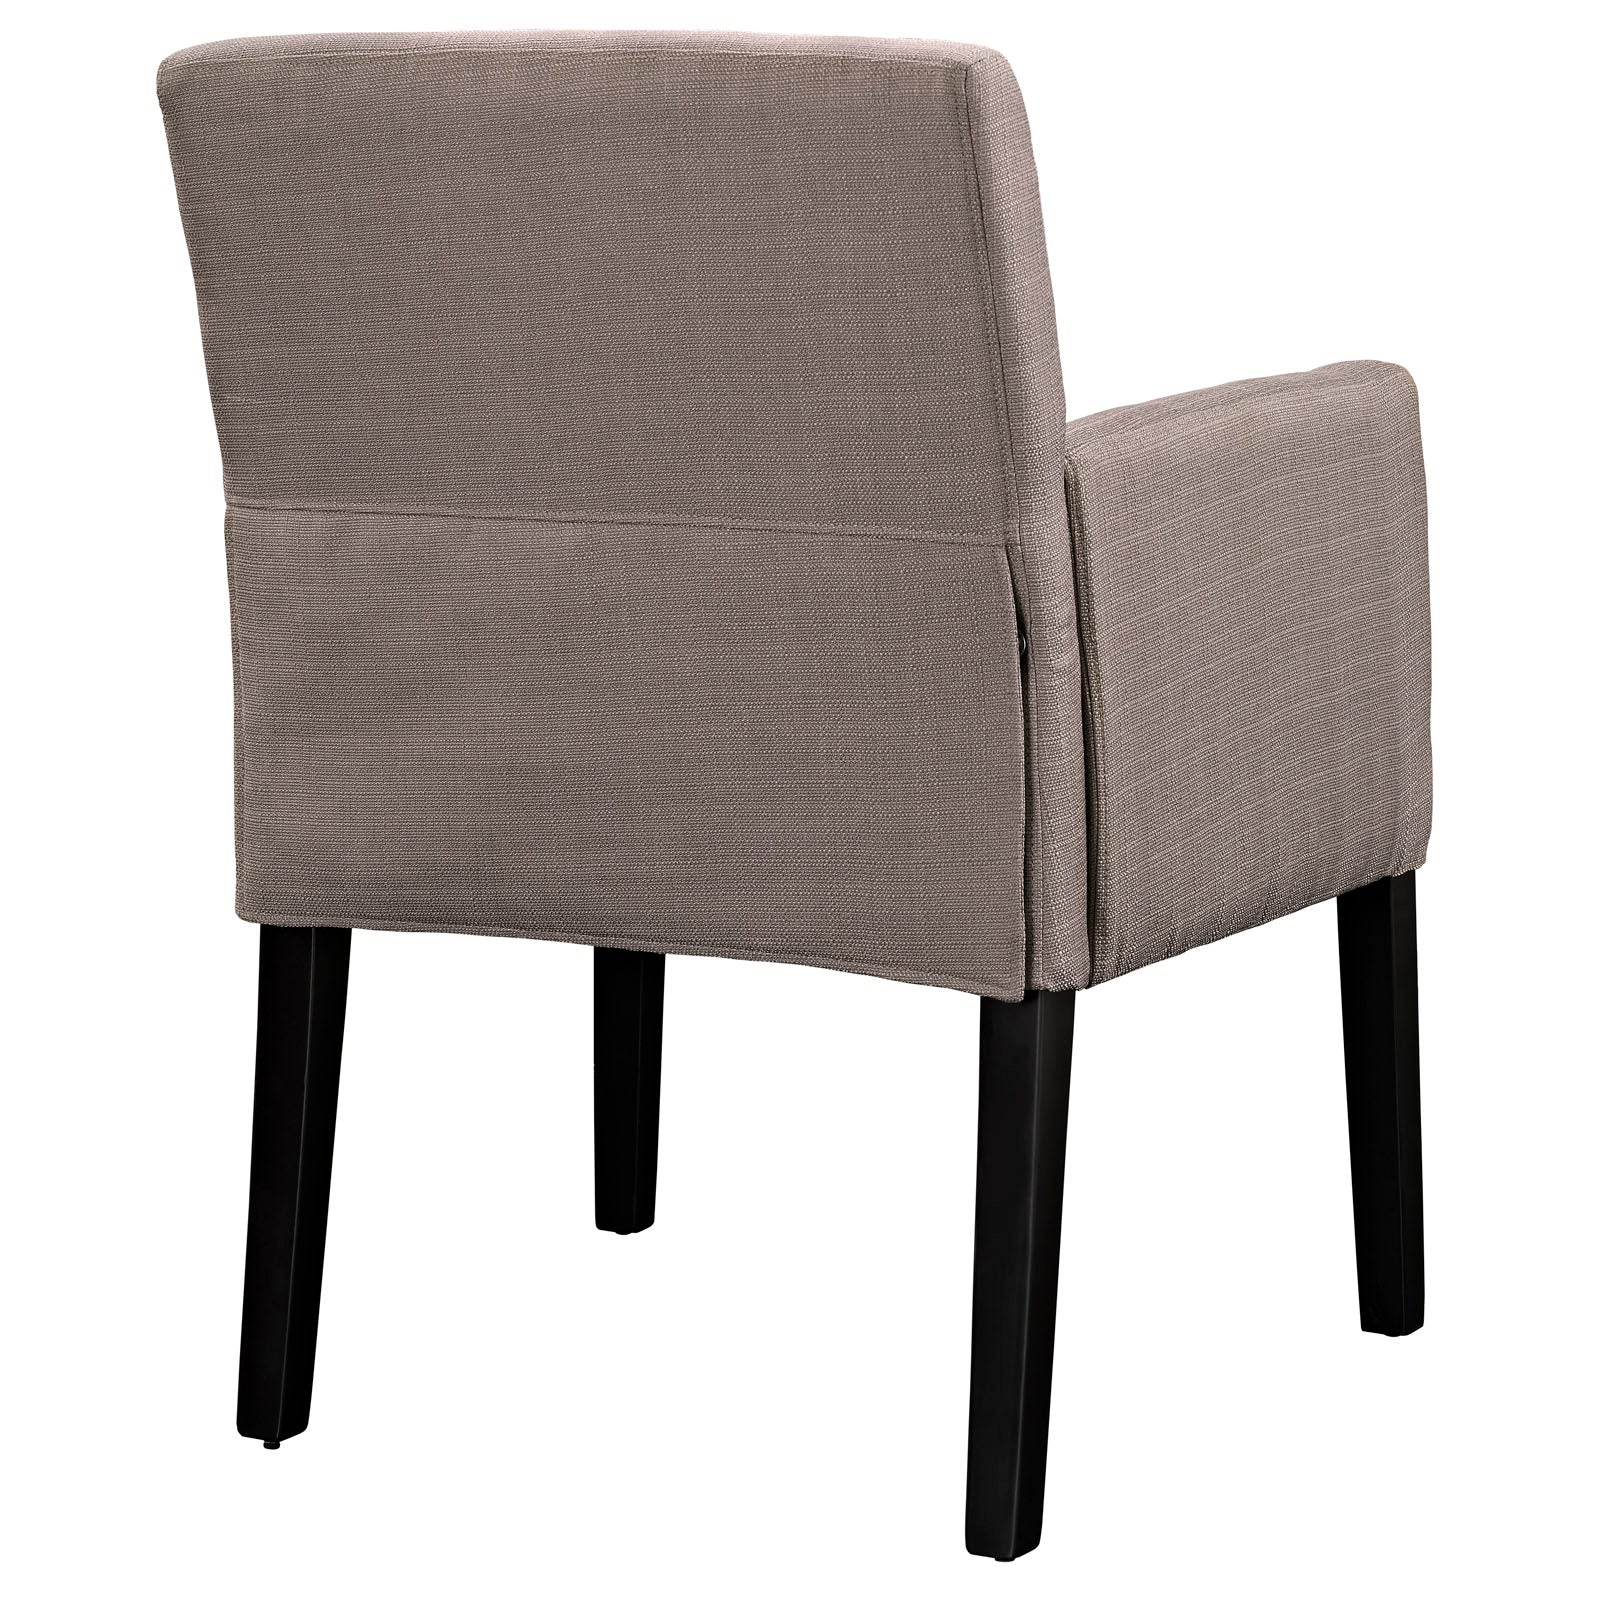 Modway Accent Chairs - Chloe Armchair Gray ( Set of 2 )